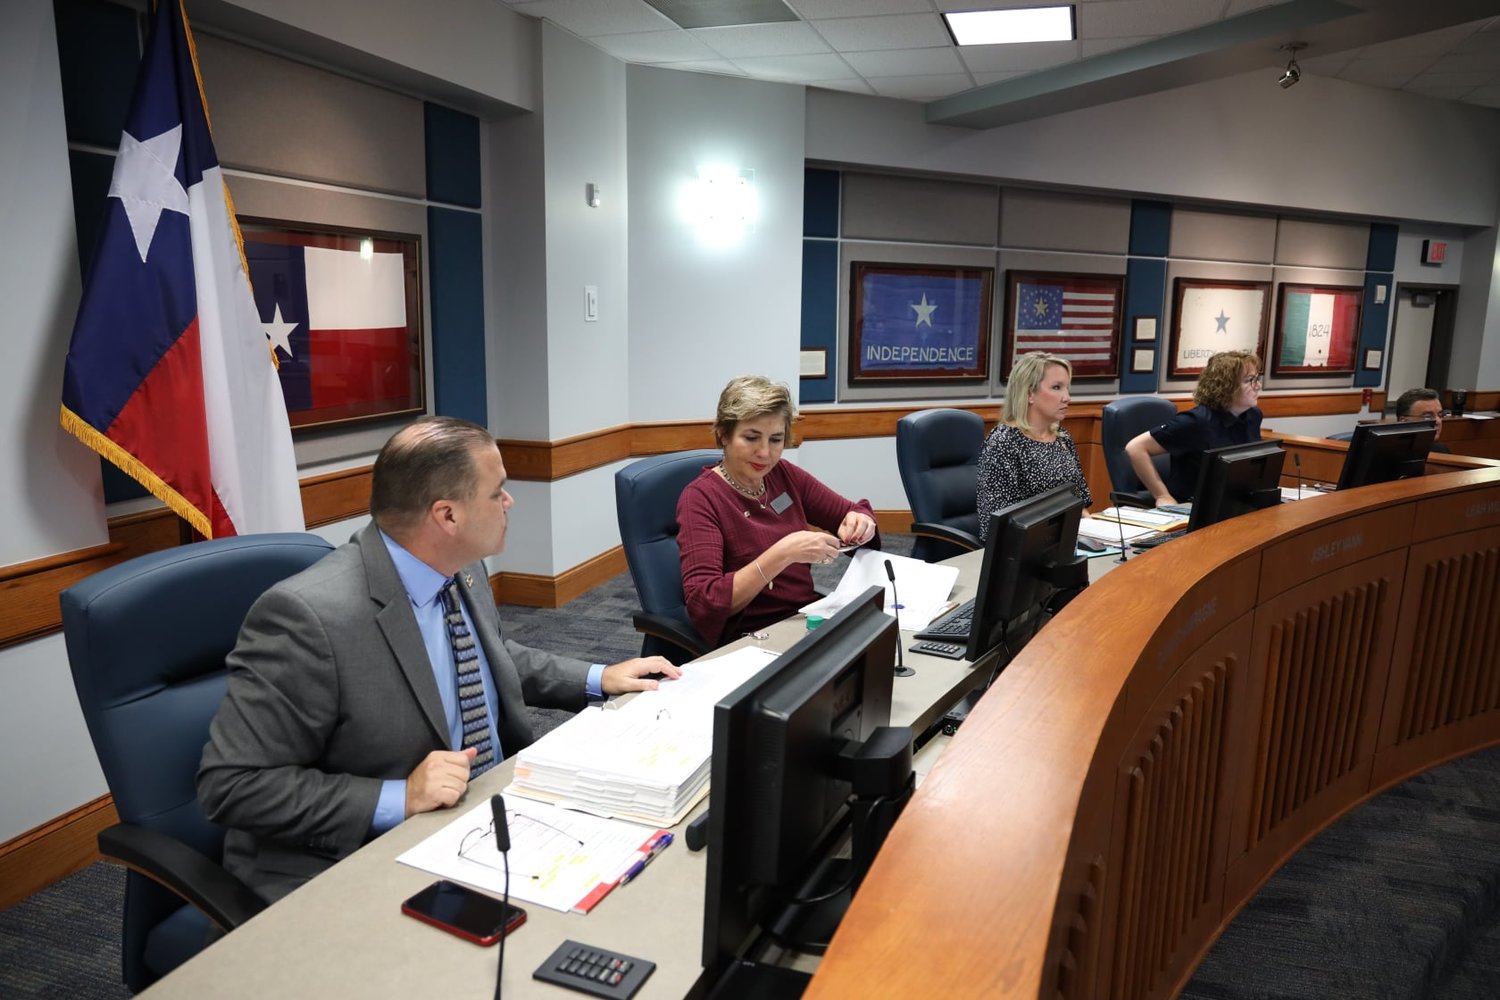 Dawn Champagne (second from left in maroon) speaks with Katy ISD Superintendent Ken Gregorski (far left) during a recent Katy ISD Board of Trustees meeting.